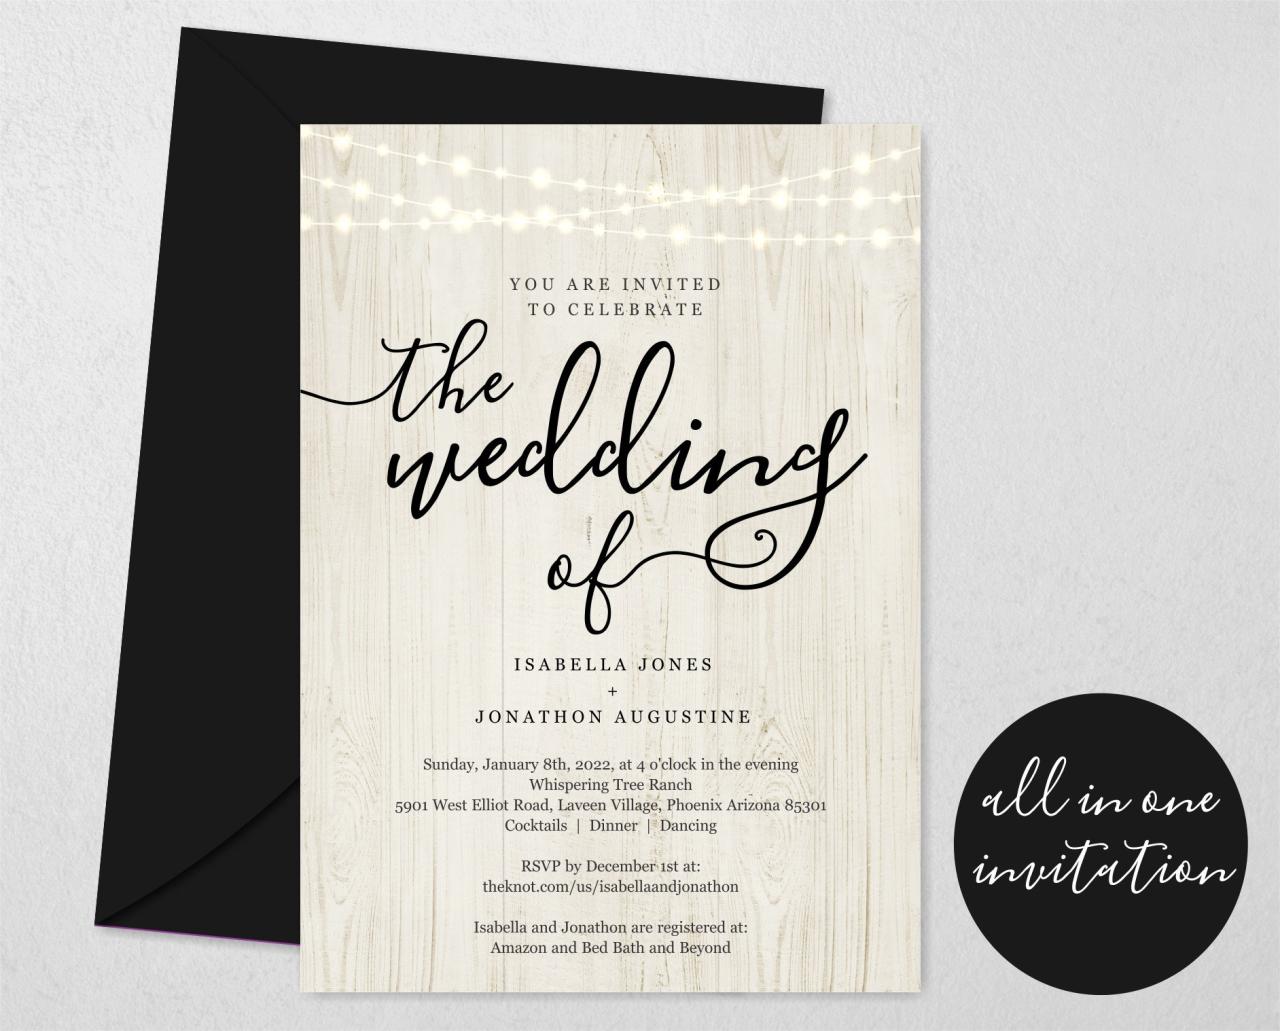 All in One Wedding Invitation w- RSVP and Registry